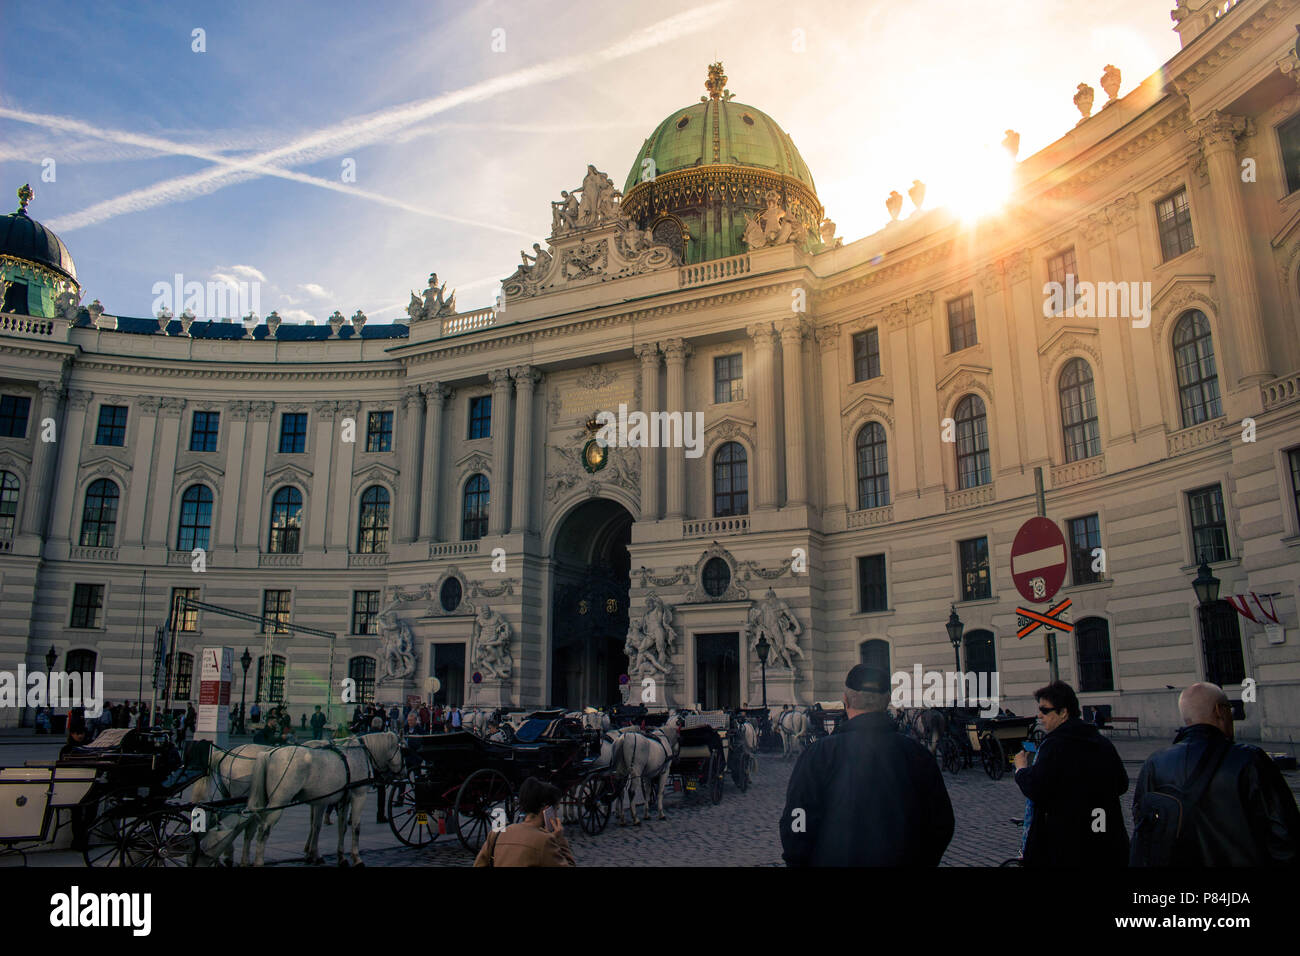 Vienna Hofburg - The official seat of the federal president - The capital of austria Stock Photo